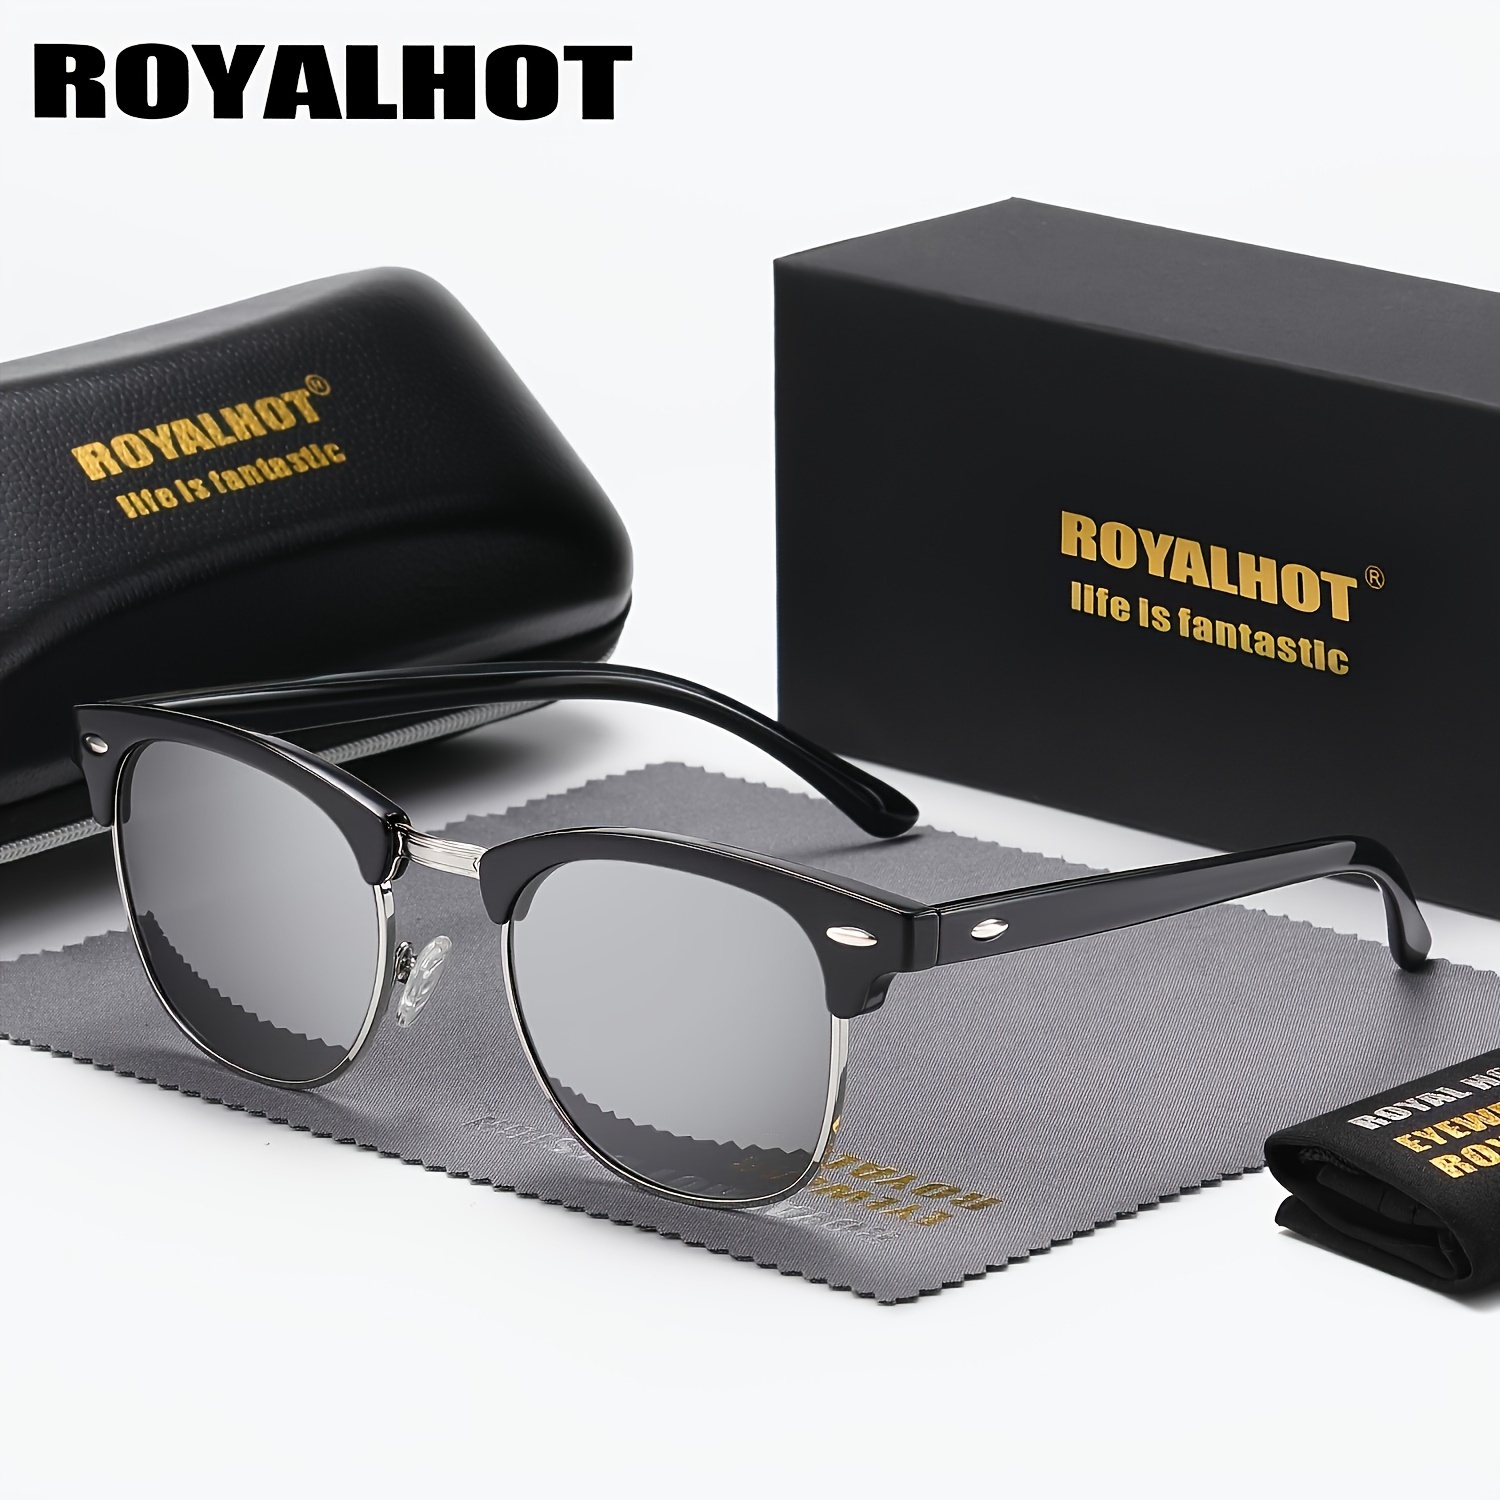 

Royalhot, Retro Classic Fantasy Eyebrow Design Polarized Glasses, For Men Women Casual Business Outdoor Sports Party Vacation Travel Driving Fishing Supply Photo Prop, Ideal Choice For Gift